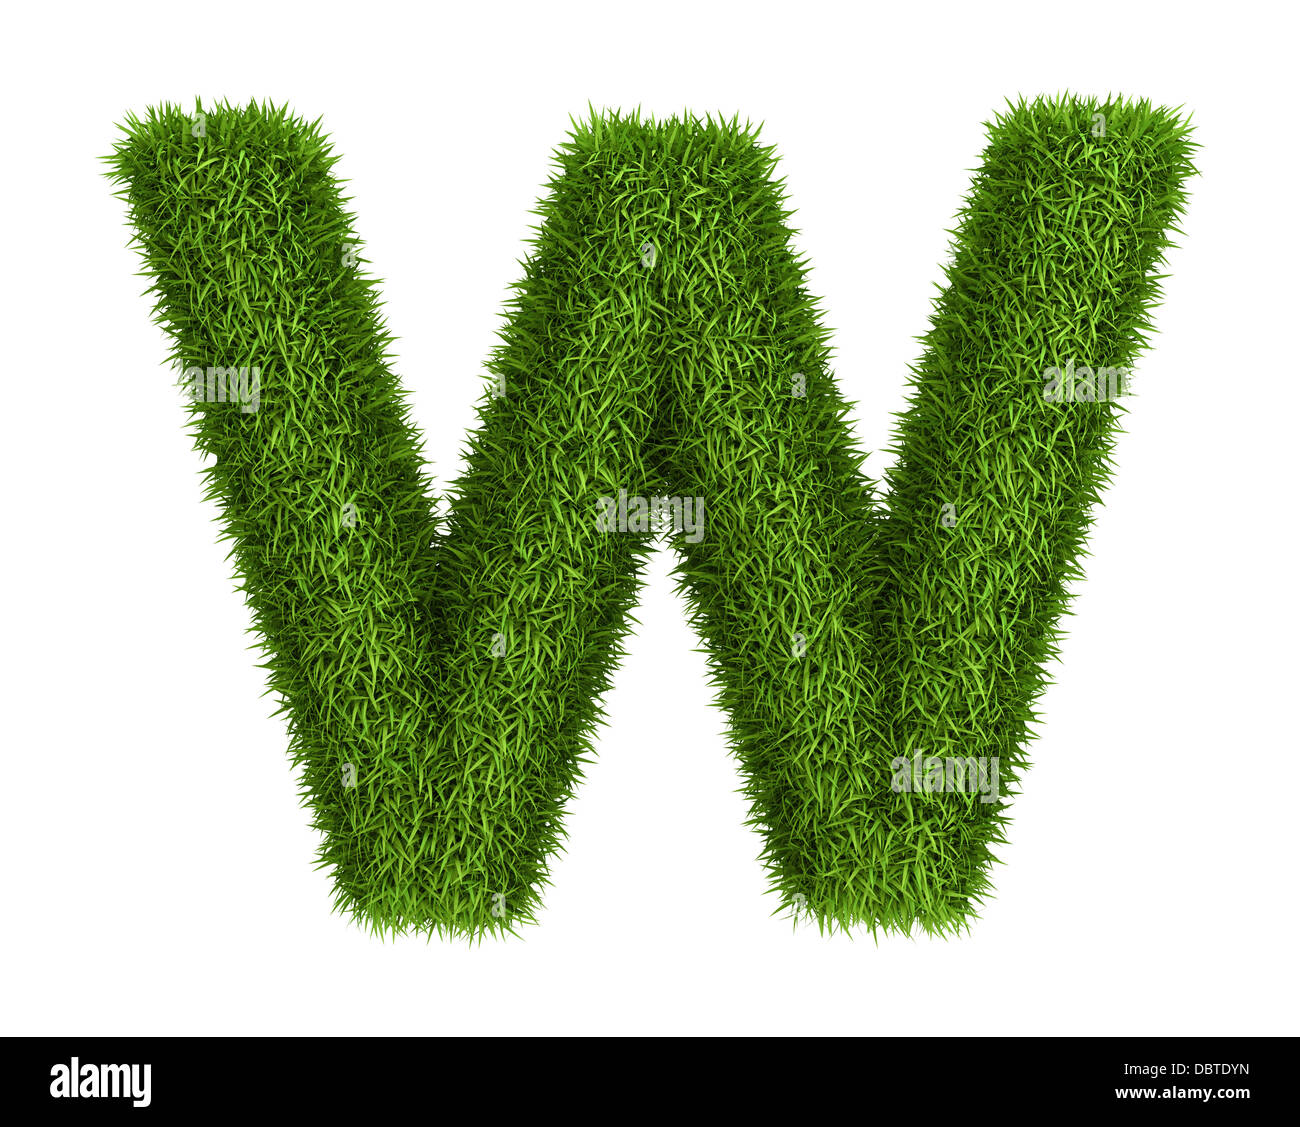 Natural grass letter w lowercase Stock Photo